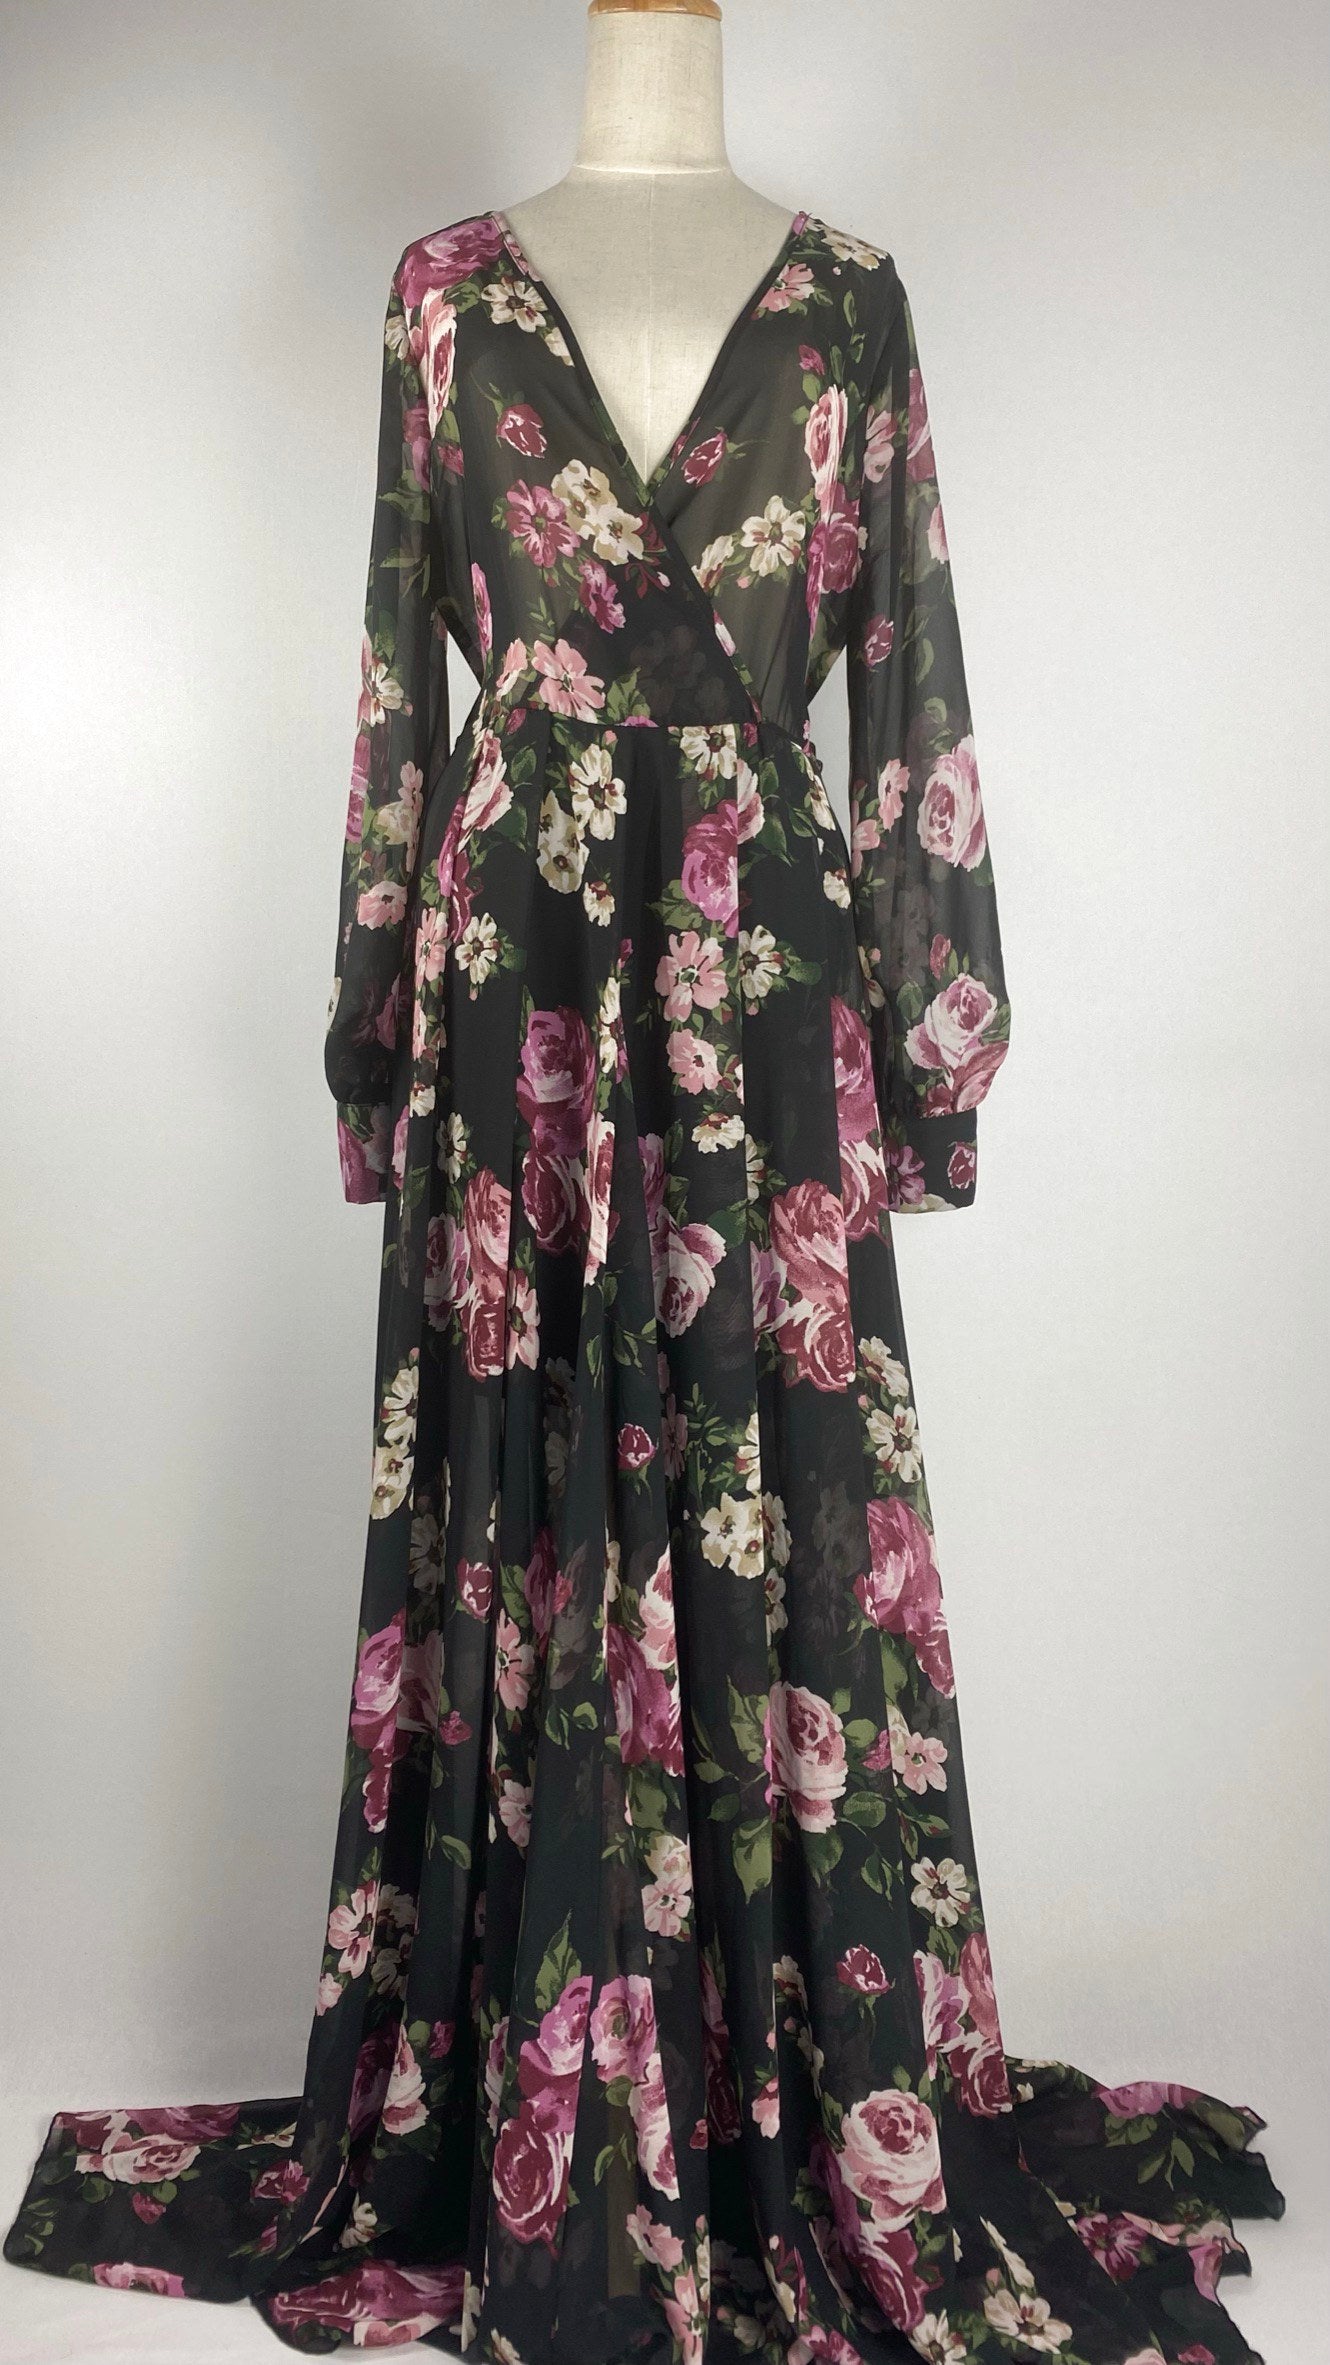 Long Sleeve Maxi Dress with Bold Flowers, Black